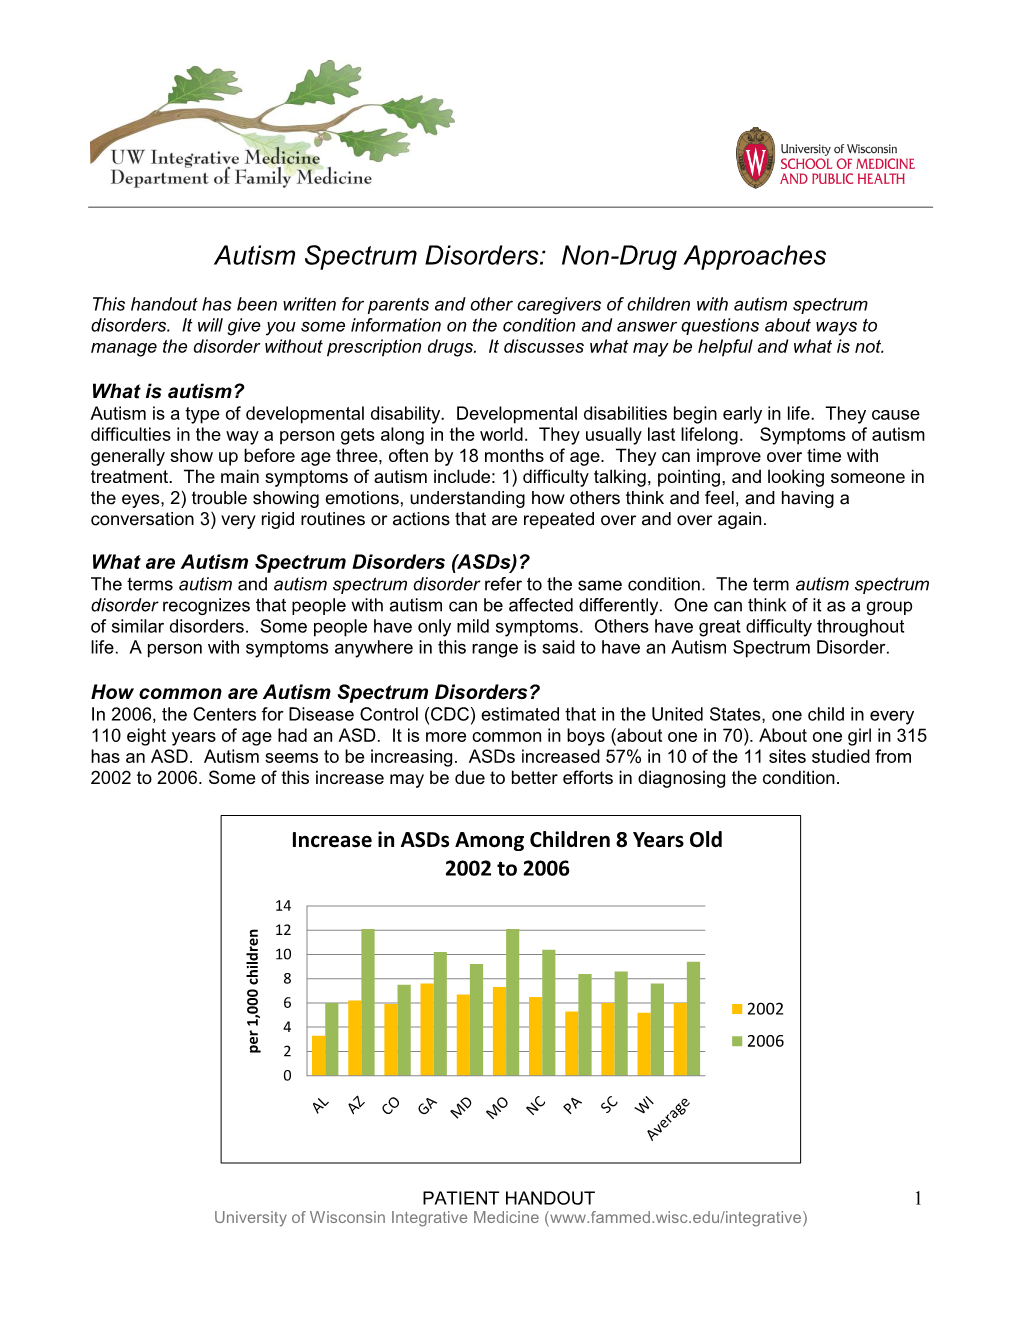 Autism Spectrum Disorders: Non-Drug Approaches